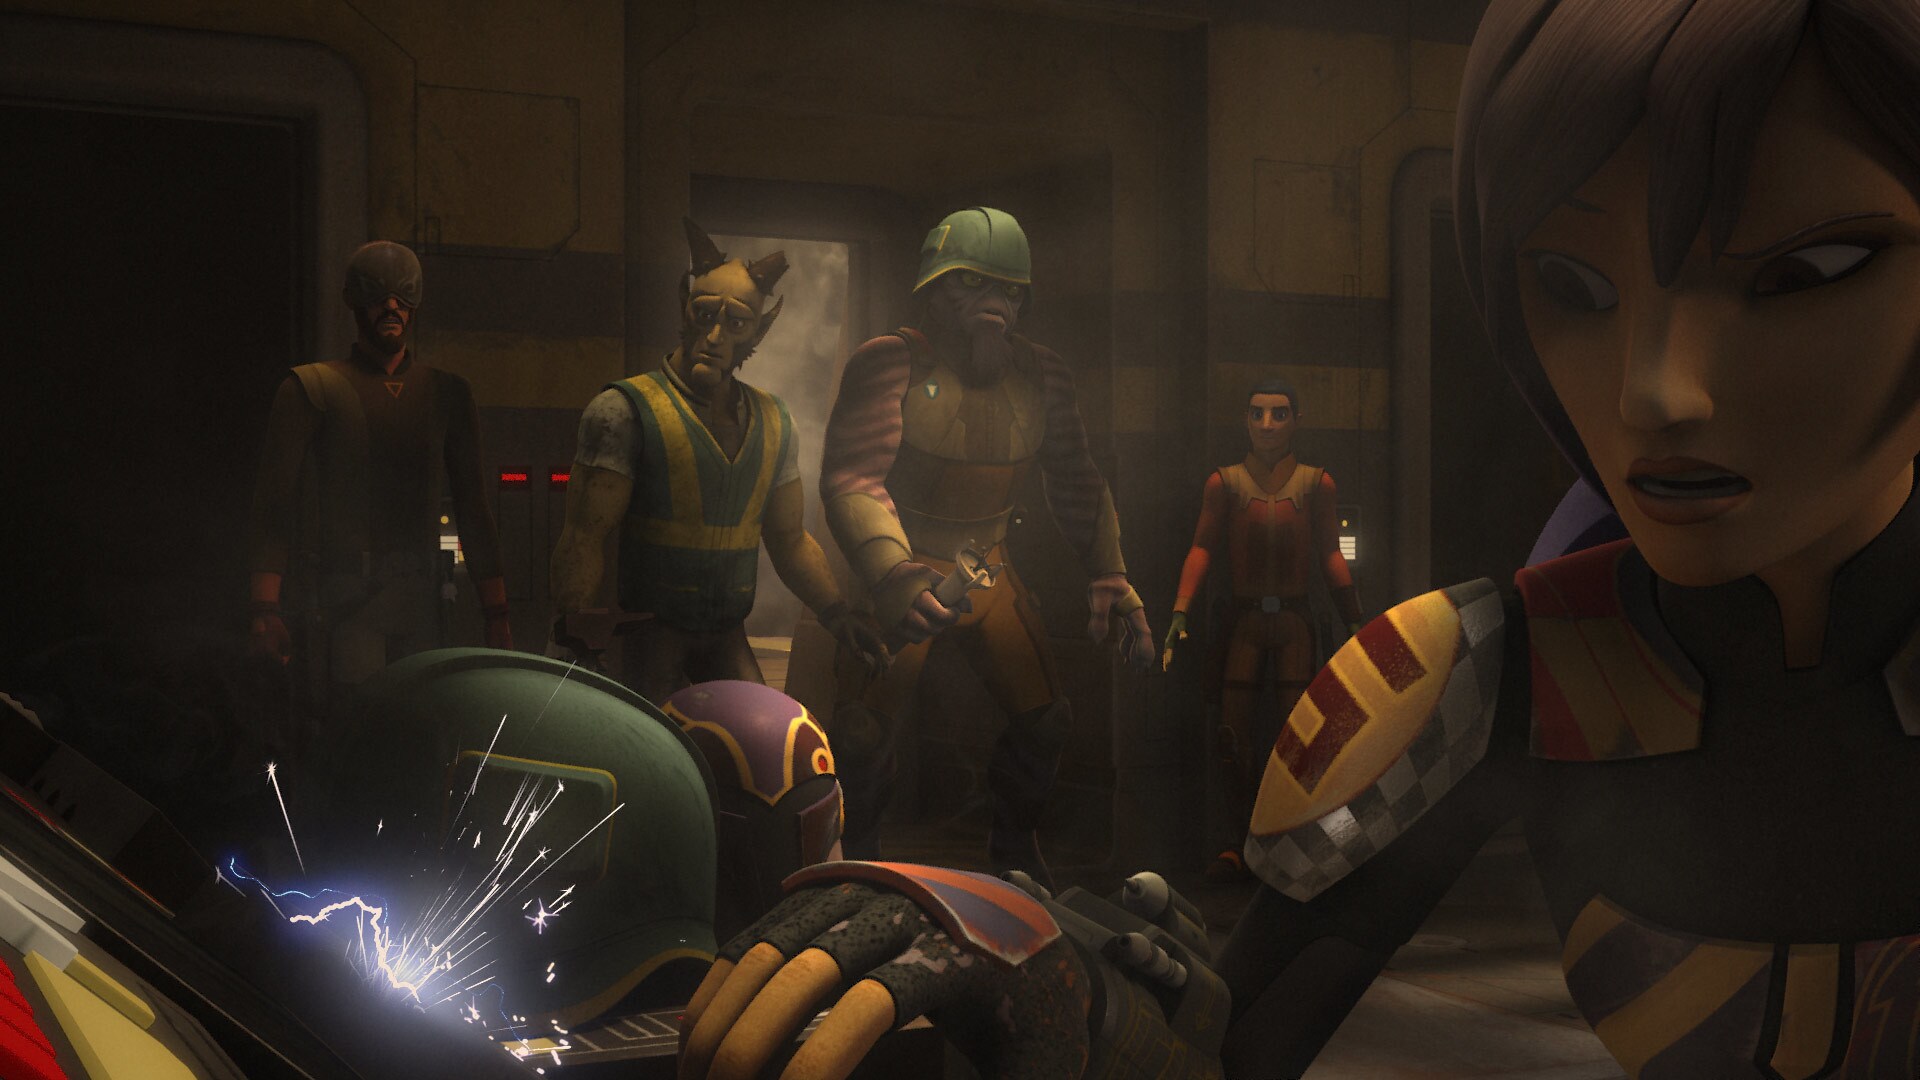 The Empire arrives to investigate. Vizago acts as the captain and covers for the rebels, while Ze...